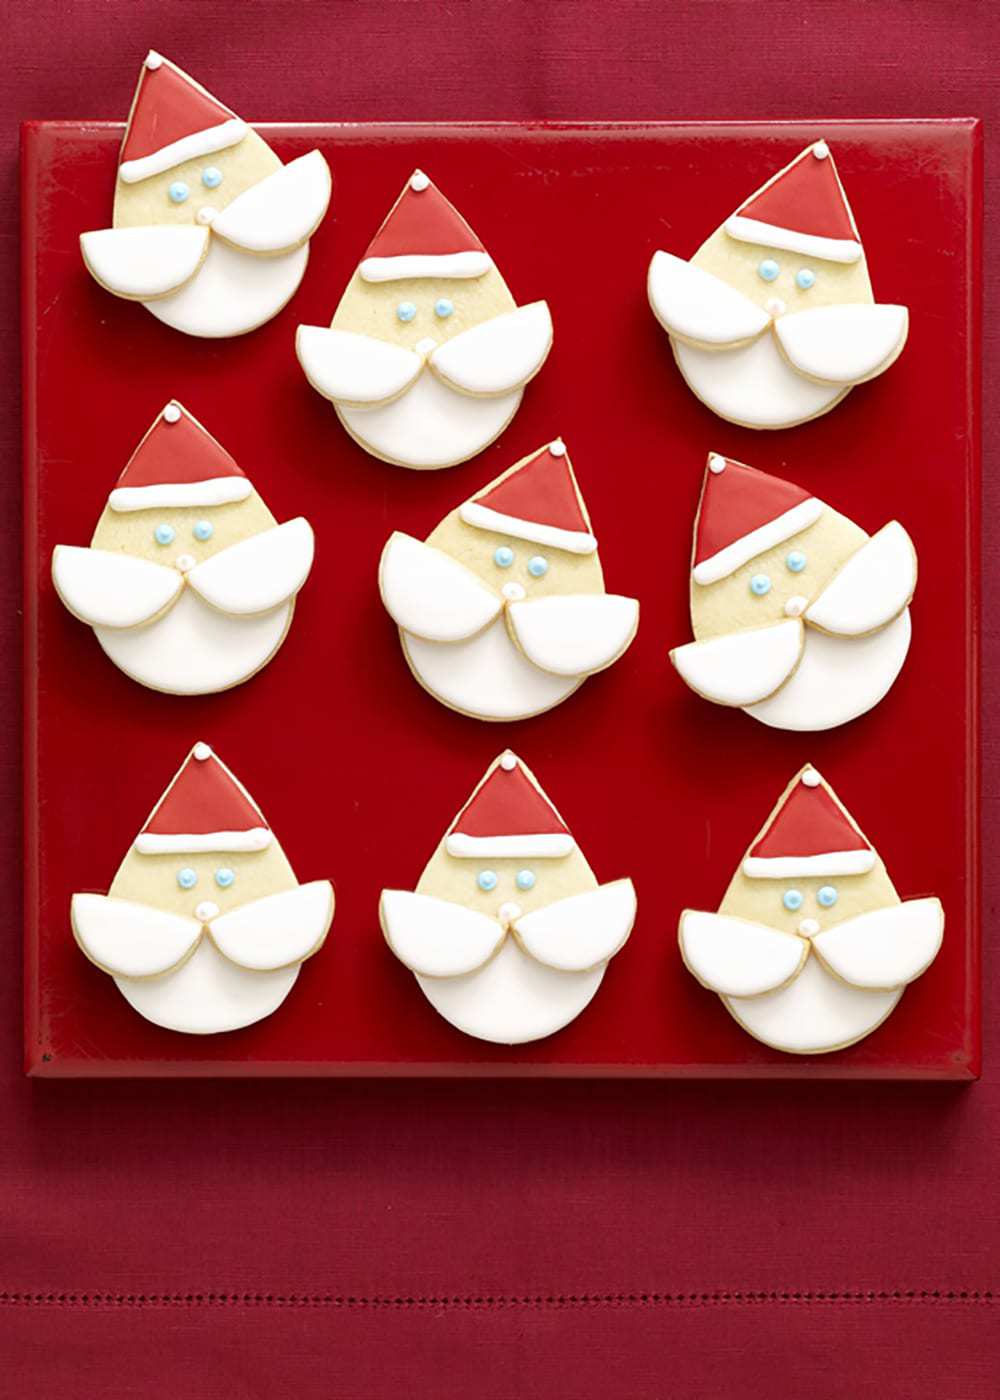 Santa face cookies on red platter and red linen